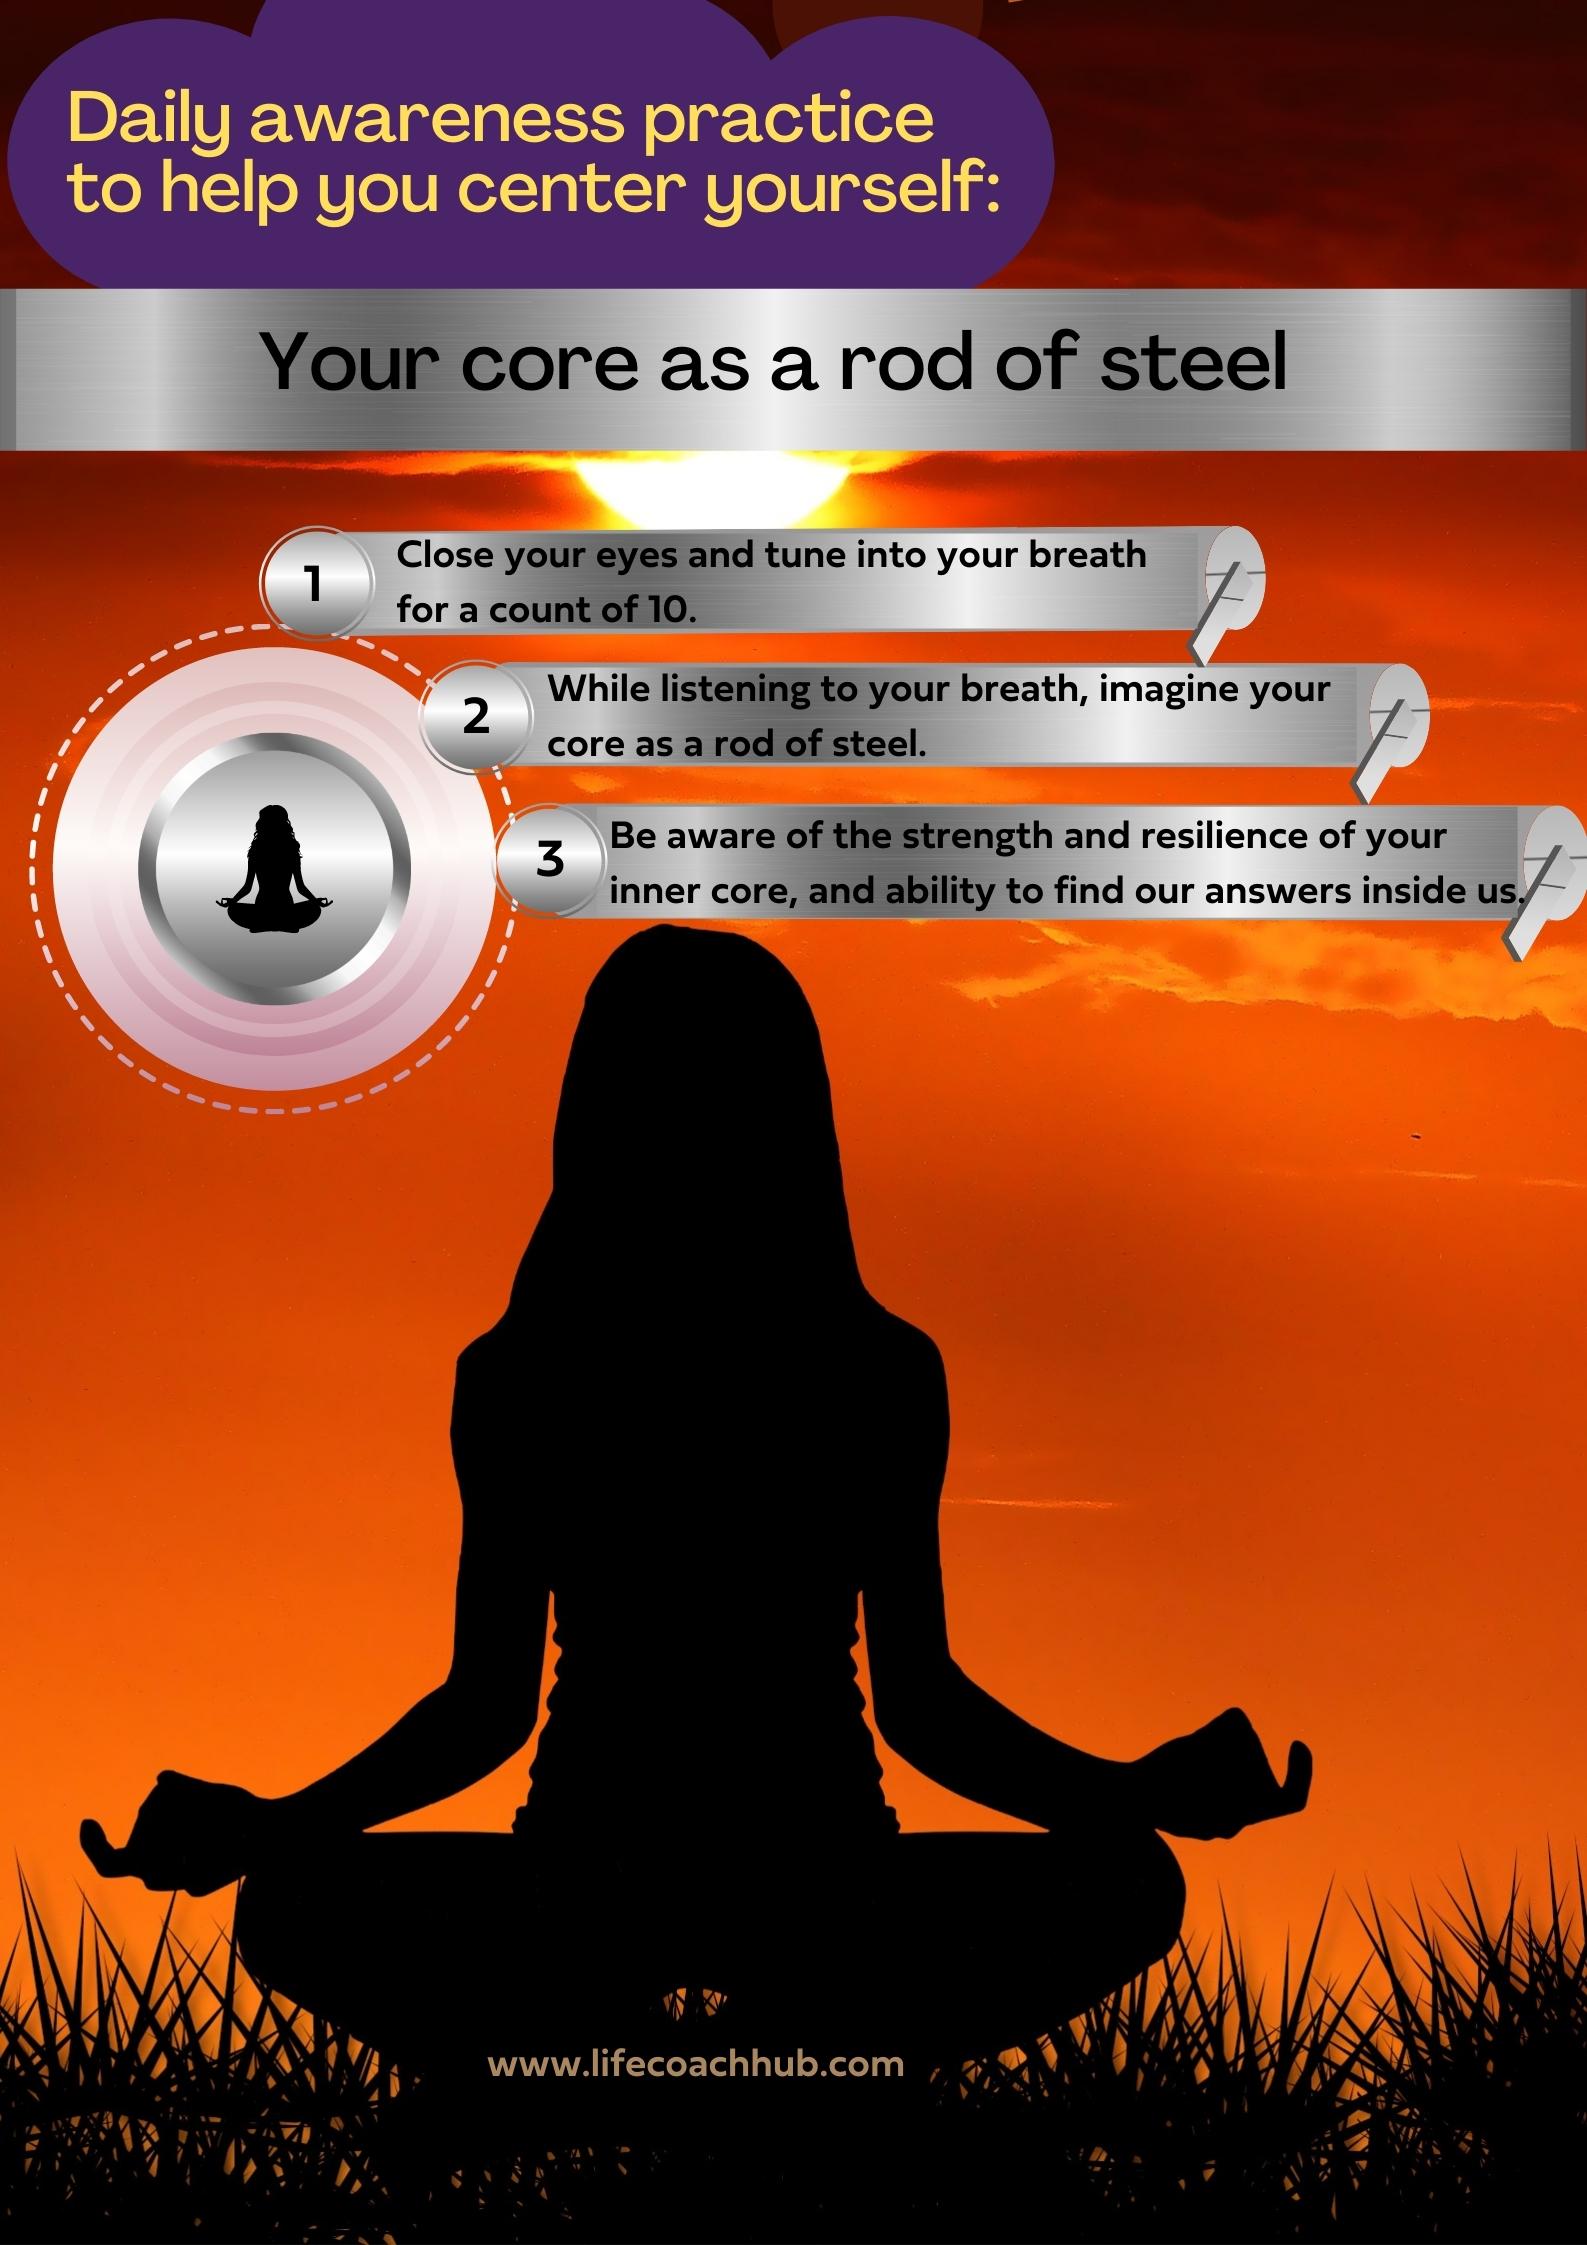 Your core as a rod of steel 